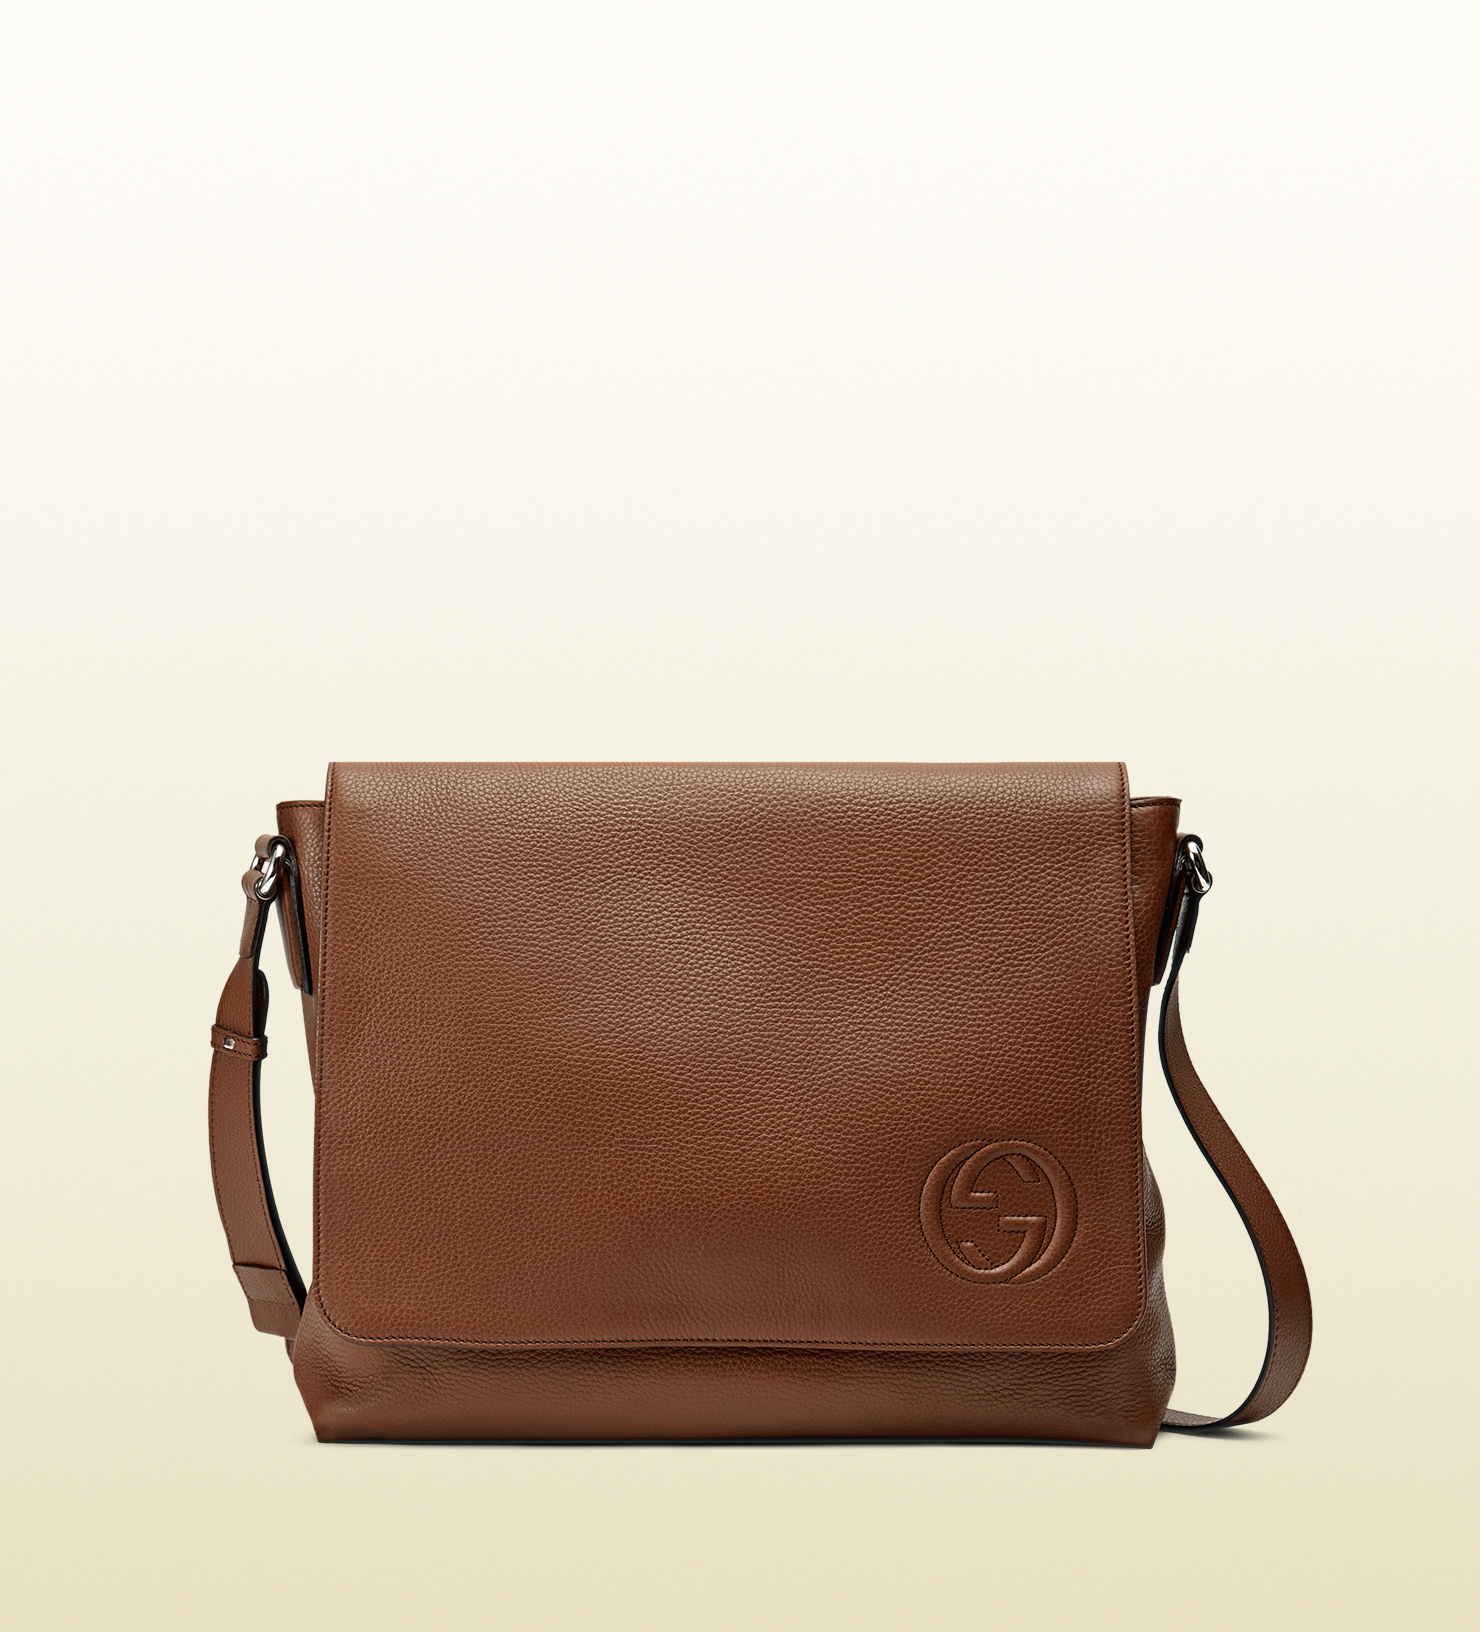 Gucci Soho Leather Messenger Bag in Brown for Men - Lyst